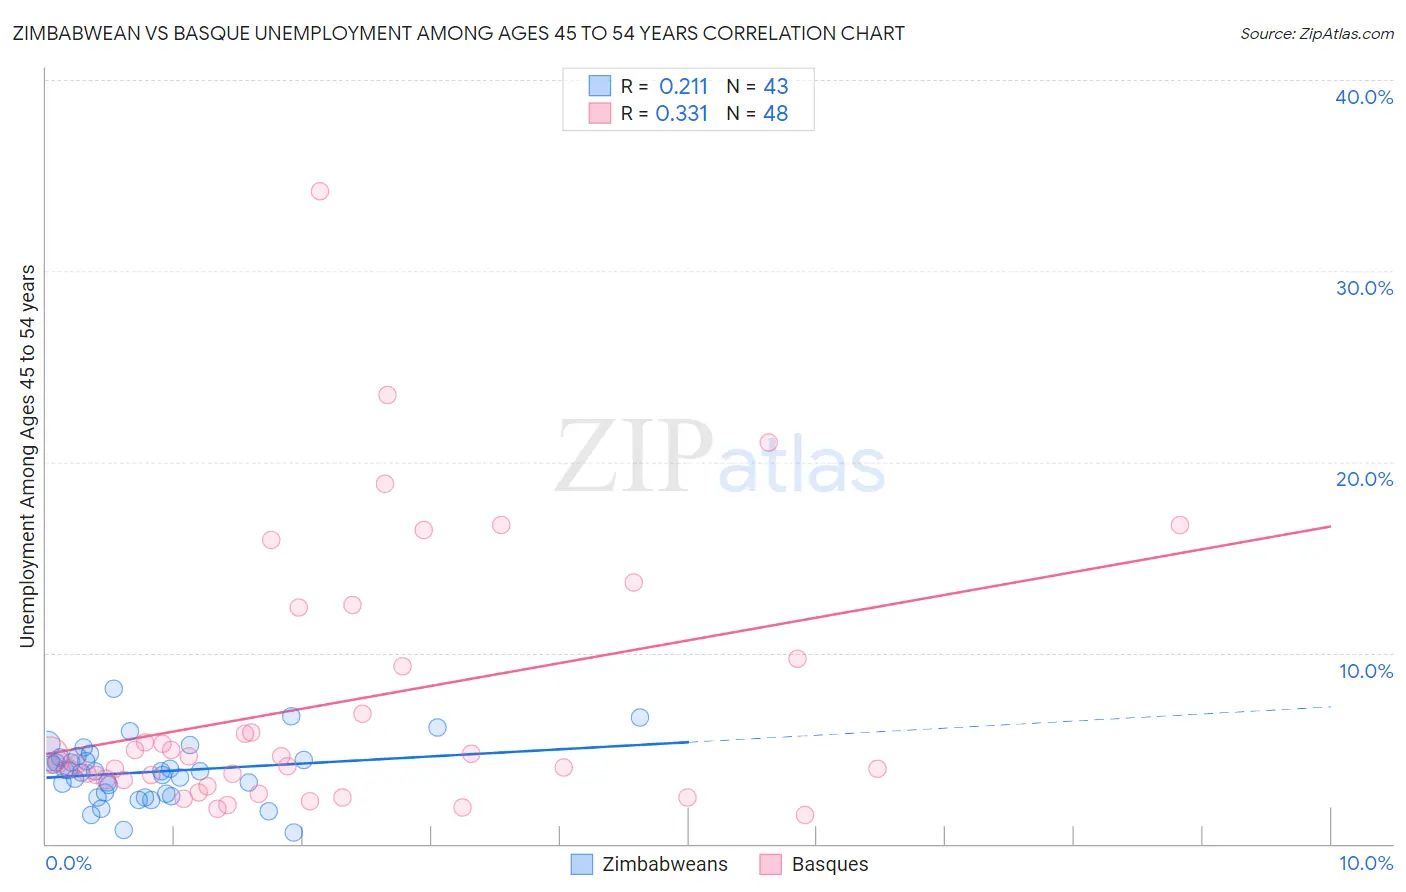 Zimbabwean vs Basque Unemployment Among Ages 45 to 54 years